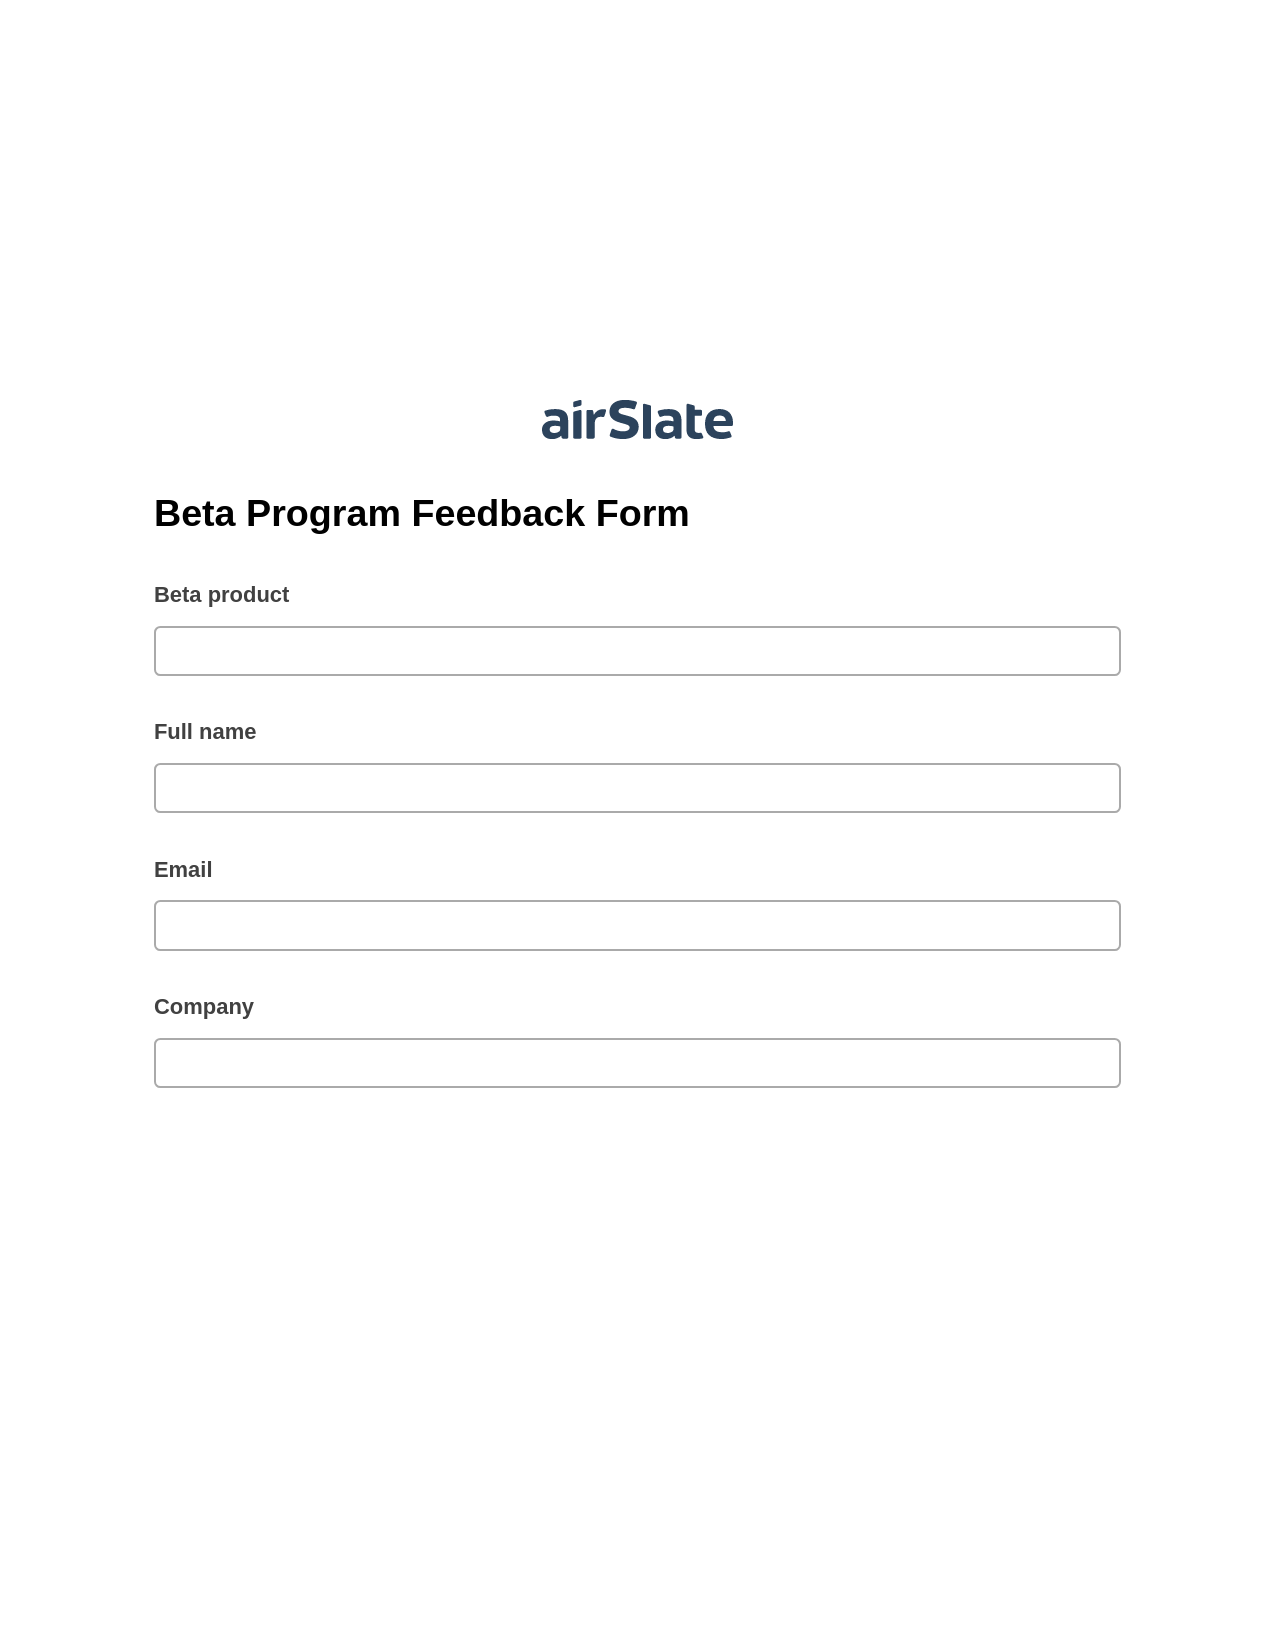 Multirole Beta Program Feedback Form Pre-fill from NetSuite Records Bot, Update NetSuite Records Bot, Google Drive Bot